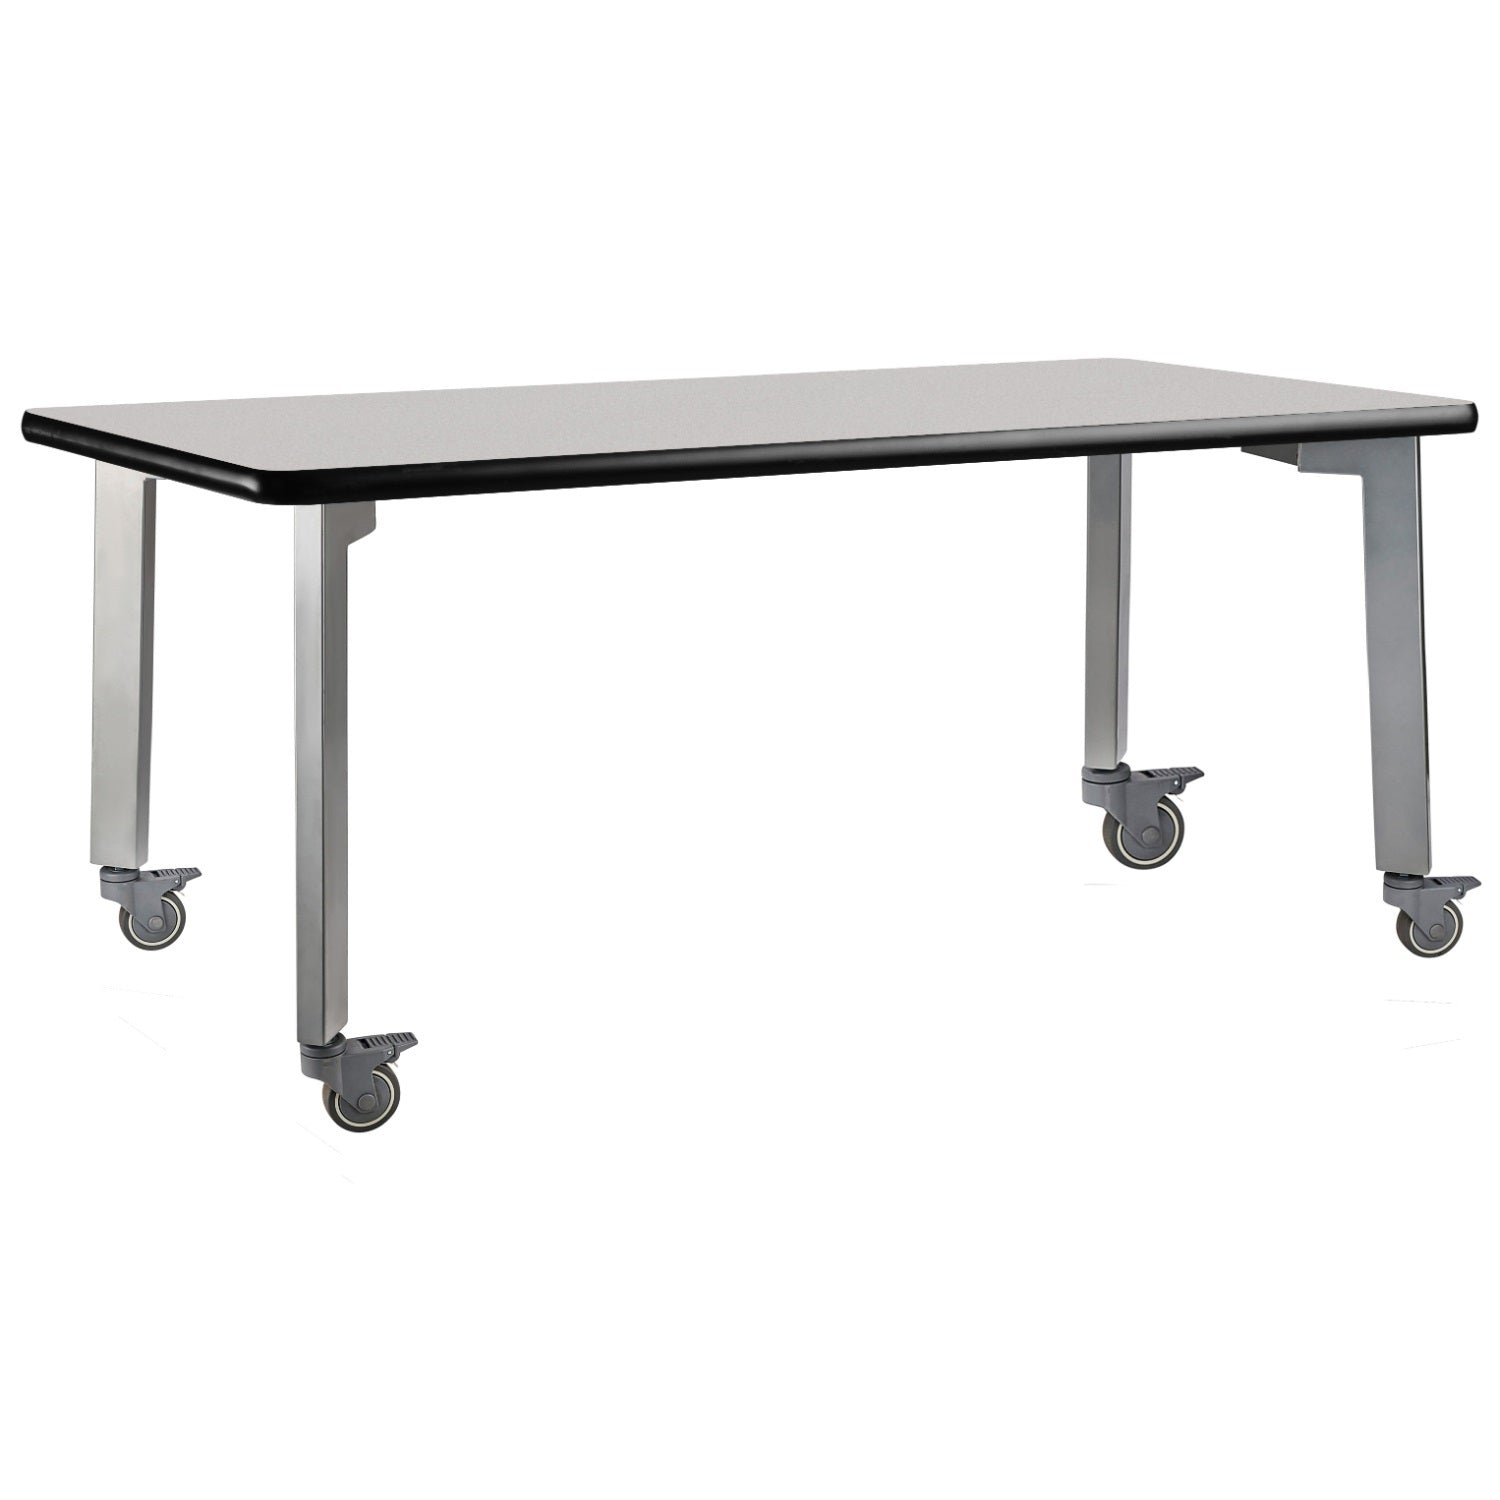 Titan Mobile Table, 30" x 48", Supreme High Pressure Laminate Top with MDF Core and ProtectEdge